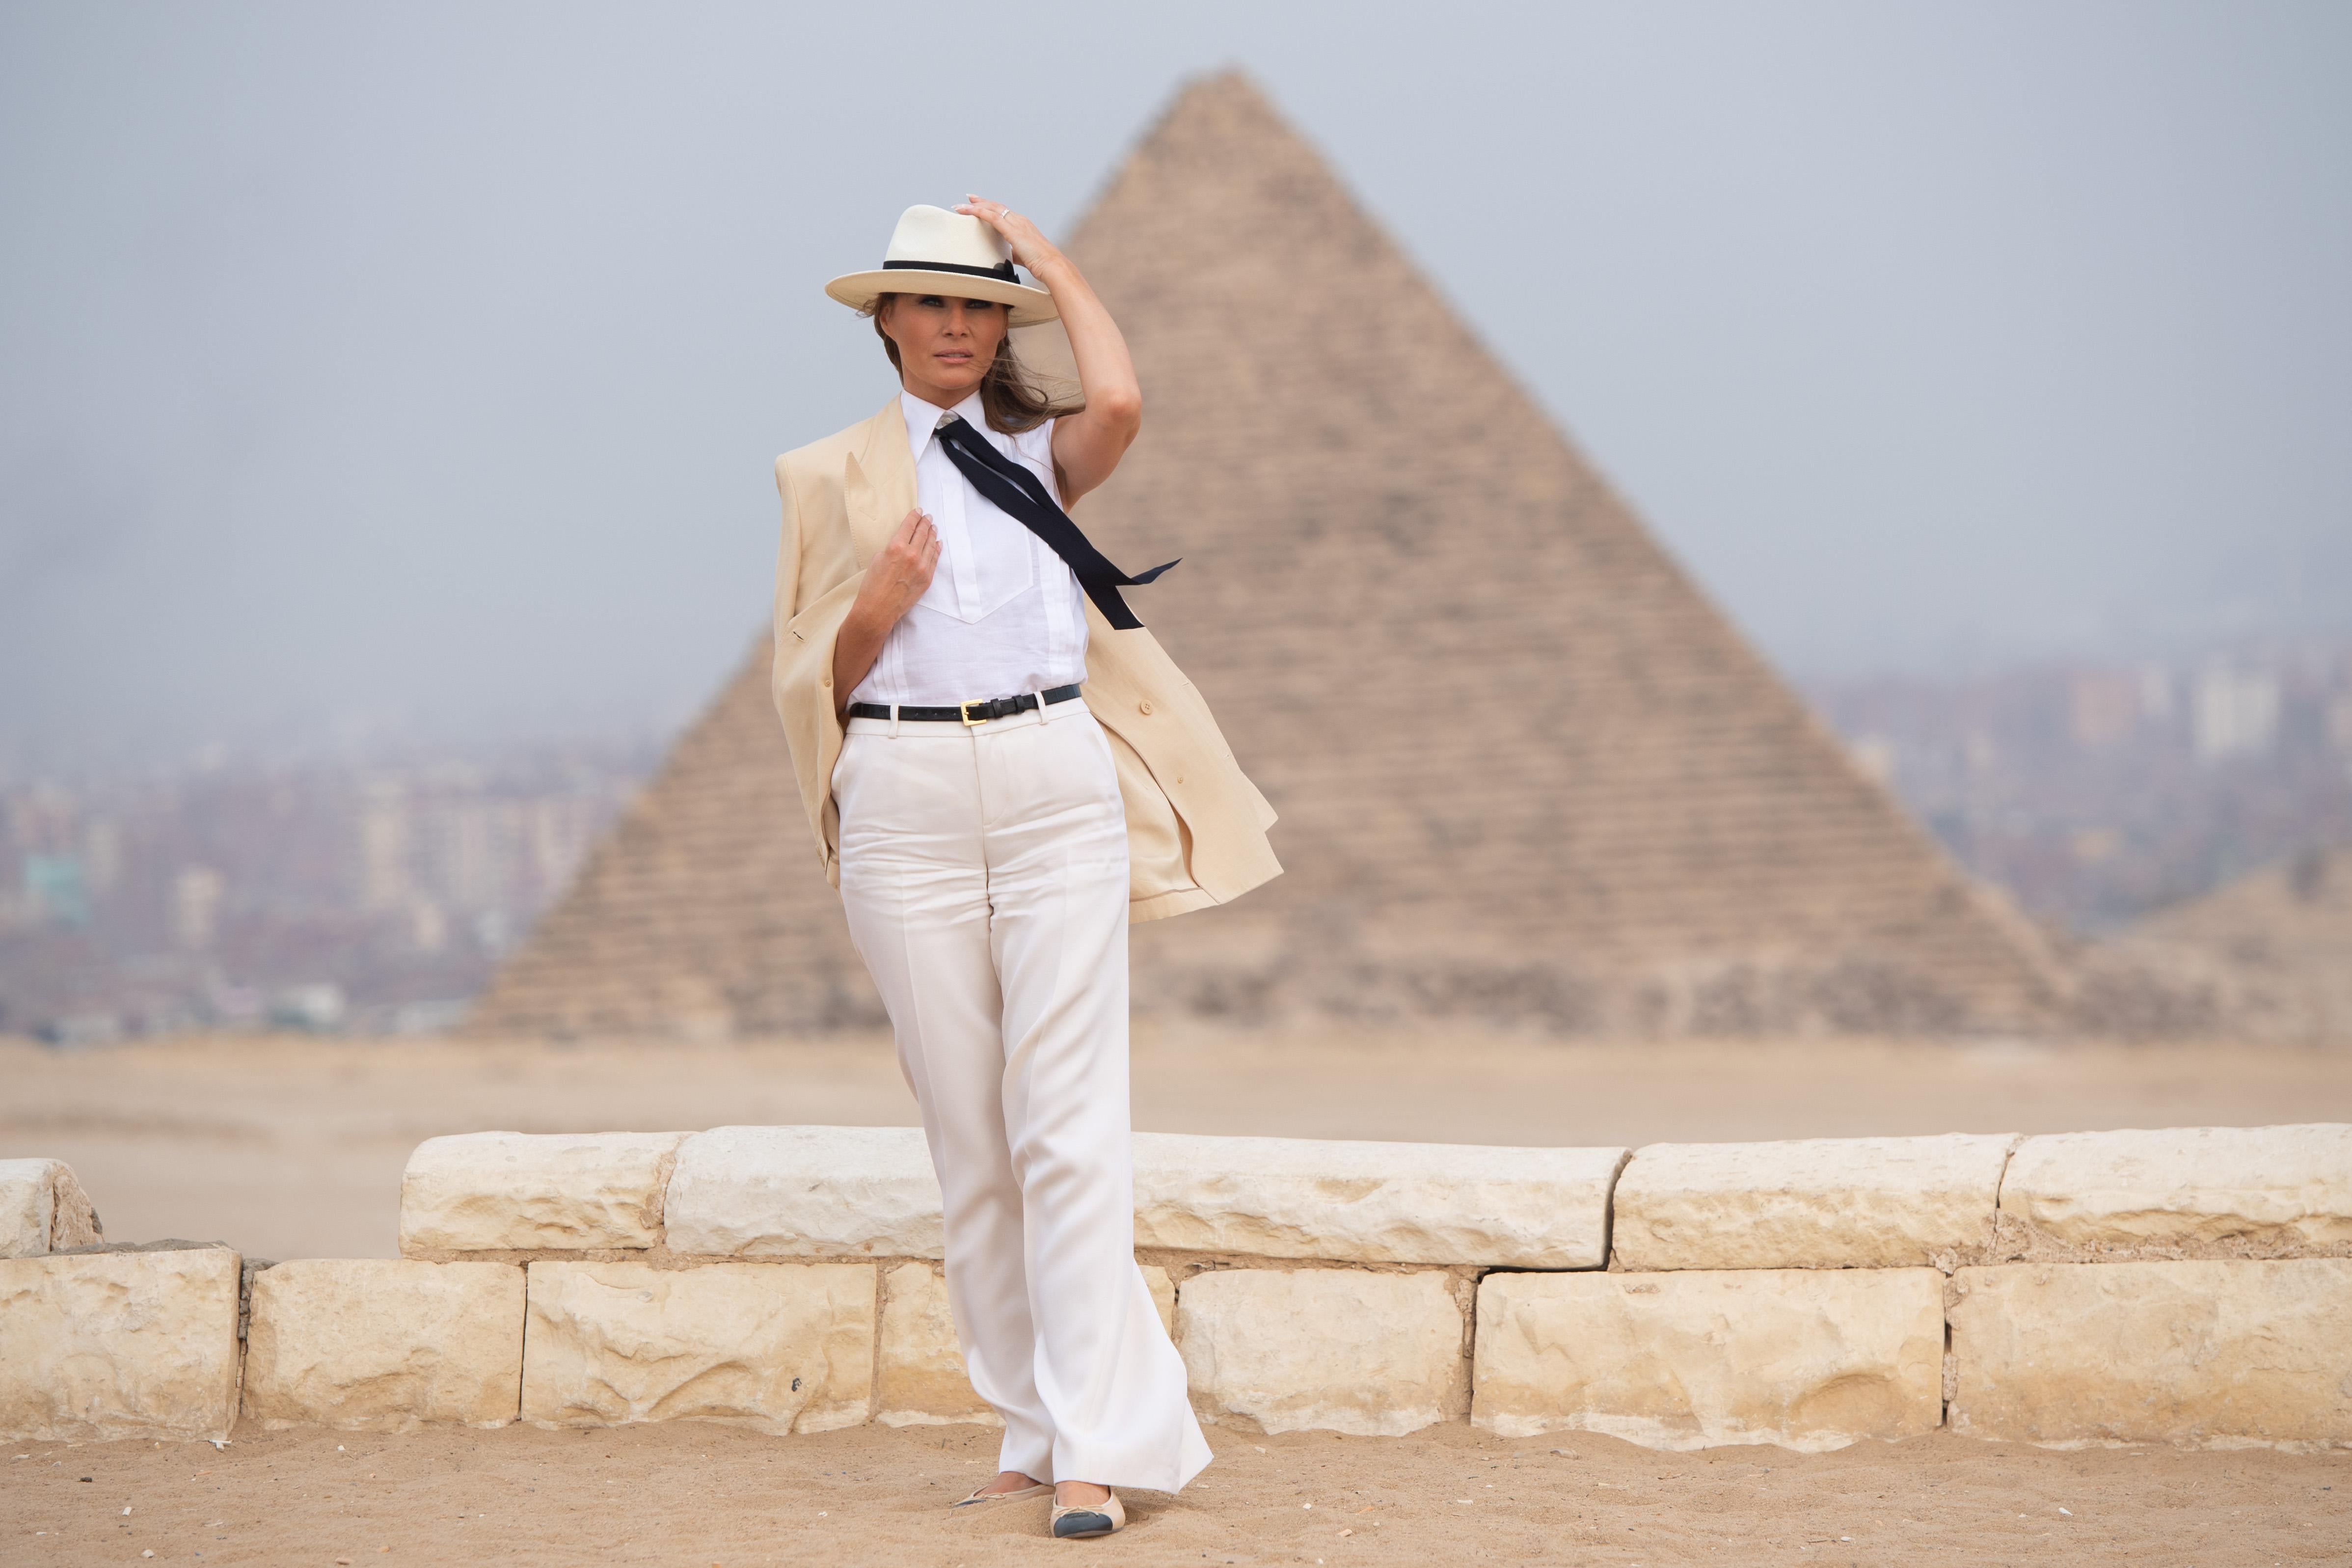 Melania Trump clasps her beige blazer with one hand and her cream fedora with the other in front of a gigantic pyramid. She wears a white shirt and long black tie.